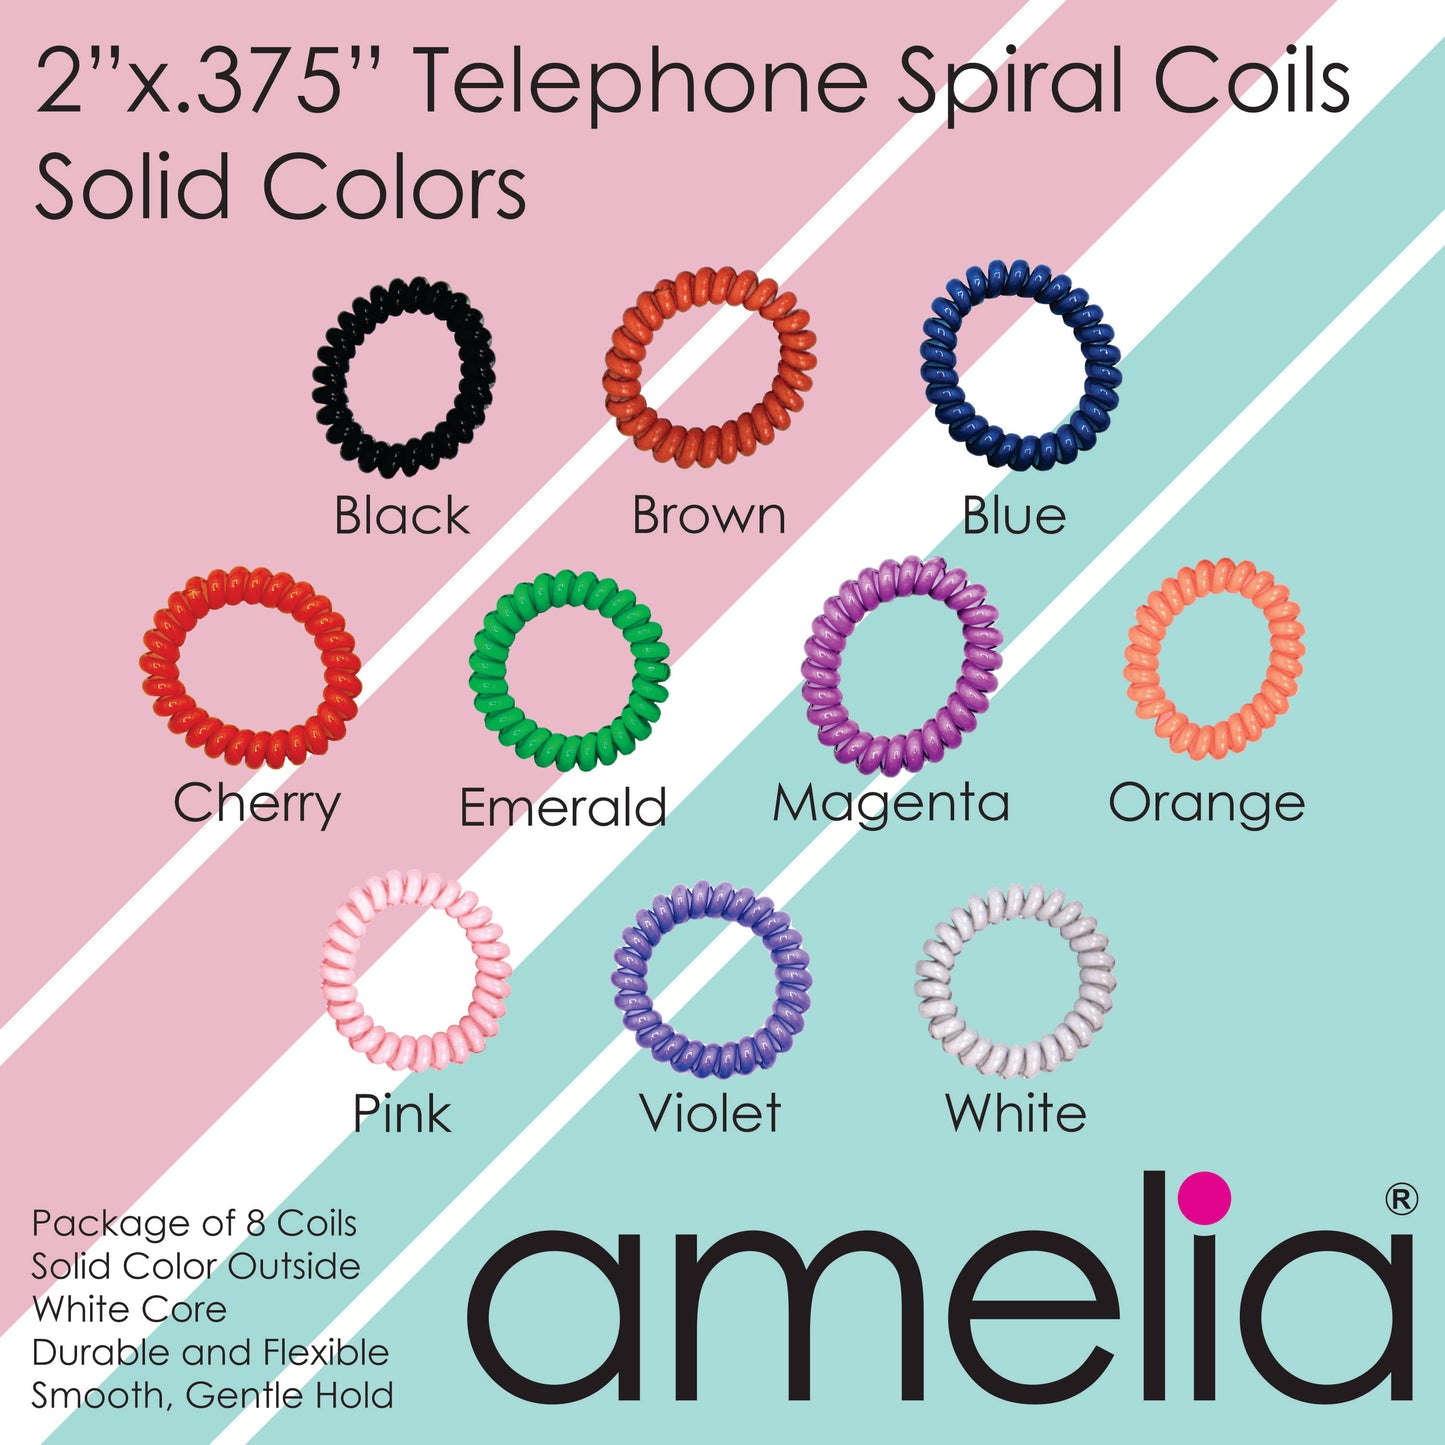 Amelia Beauty Products 8 Medium Elastic Hair Coils, 2.0in Diameter Thick Spiral Hair Ties, Gentle on Hair, Strong Hold and Minimizes Dents and Creases, Brown and White Mix